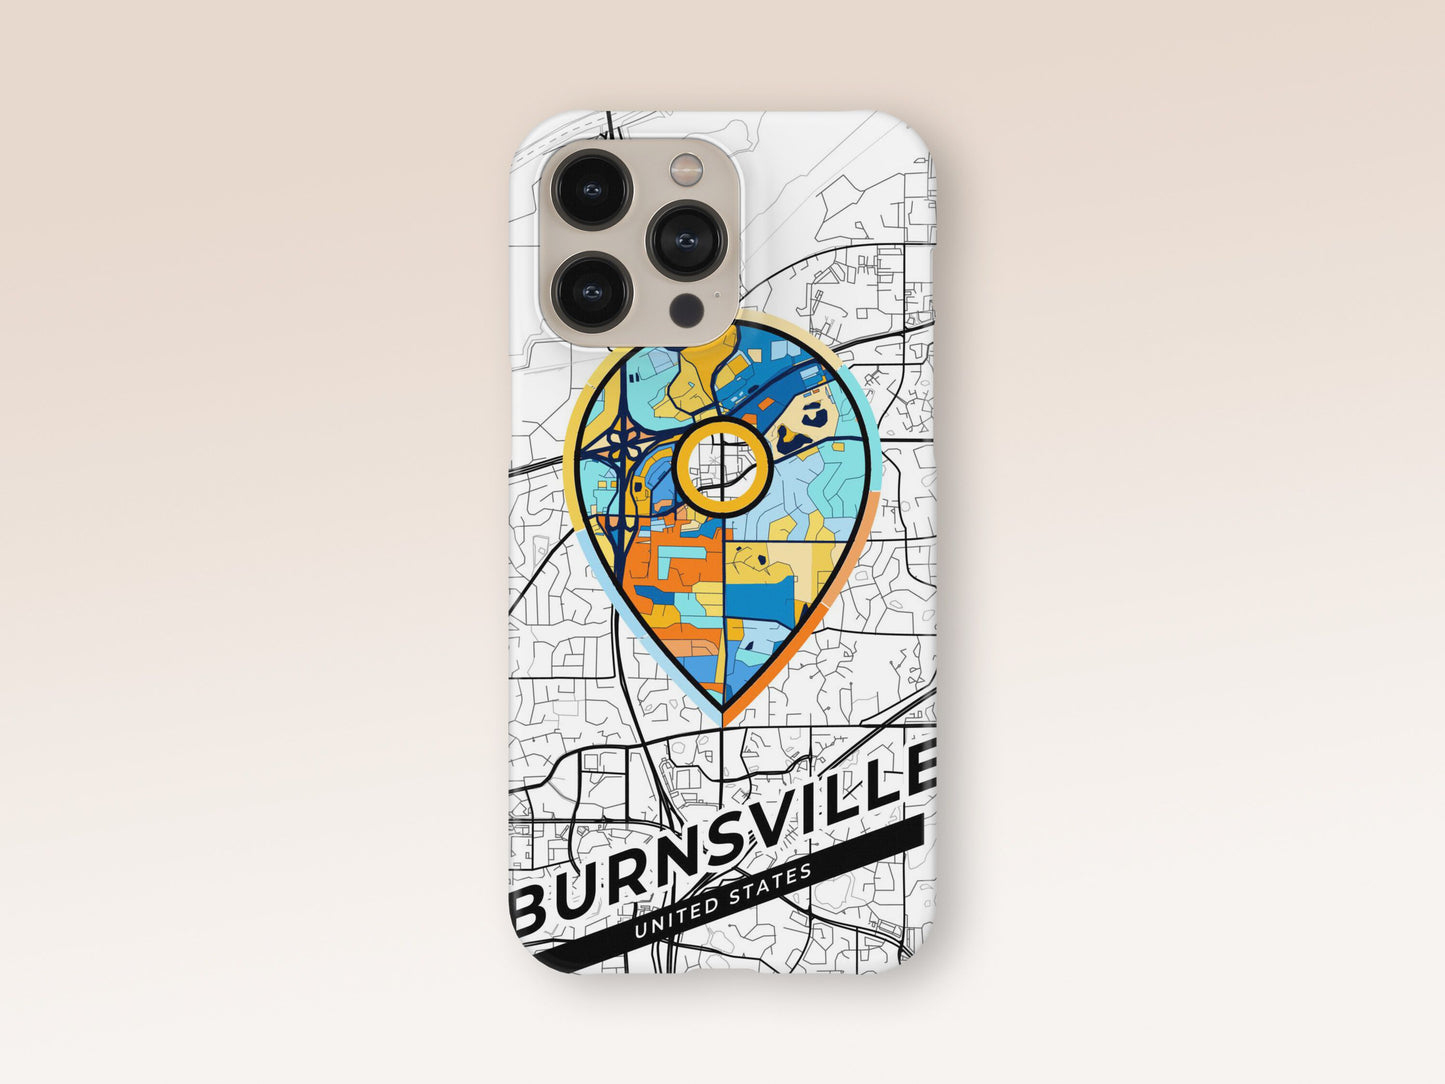 Burnsville Minnesota slim phone case with colorful icon. Birthday, wedding or housewarming gift. Couple match cases. 1